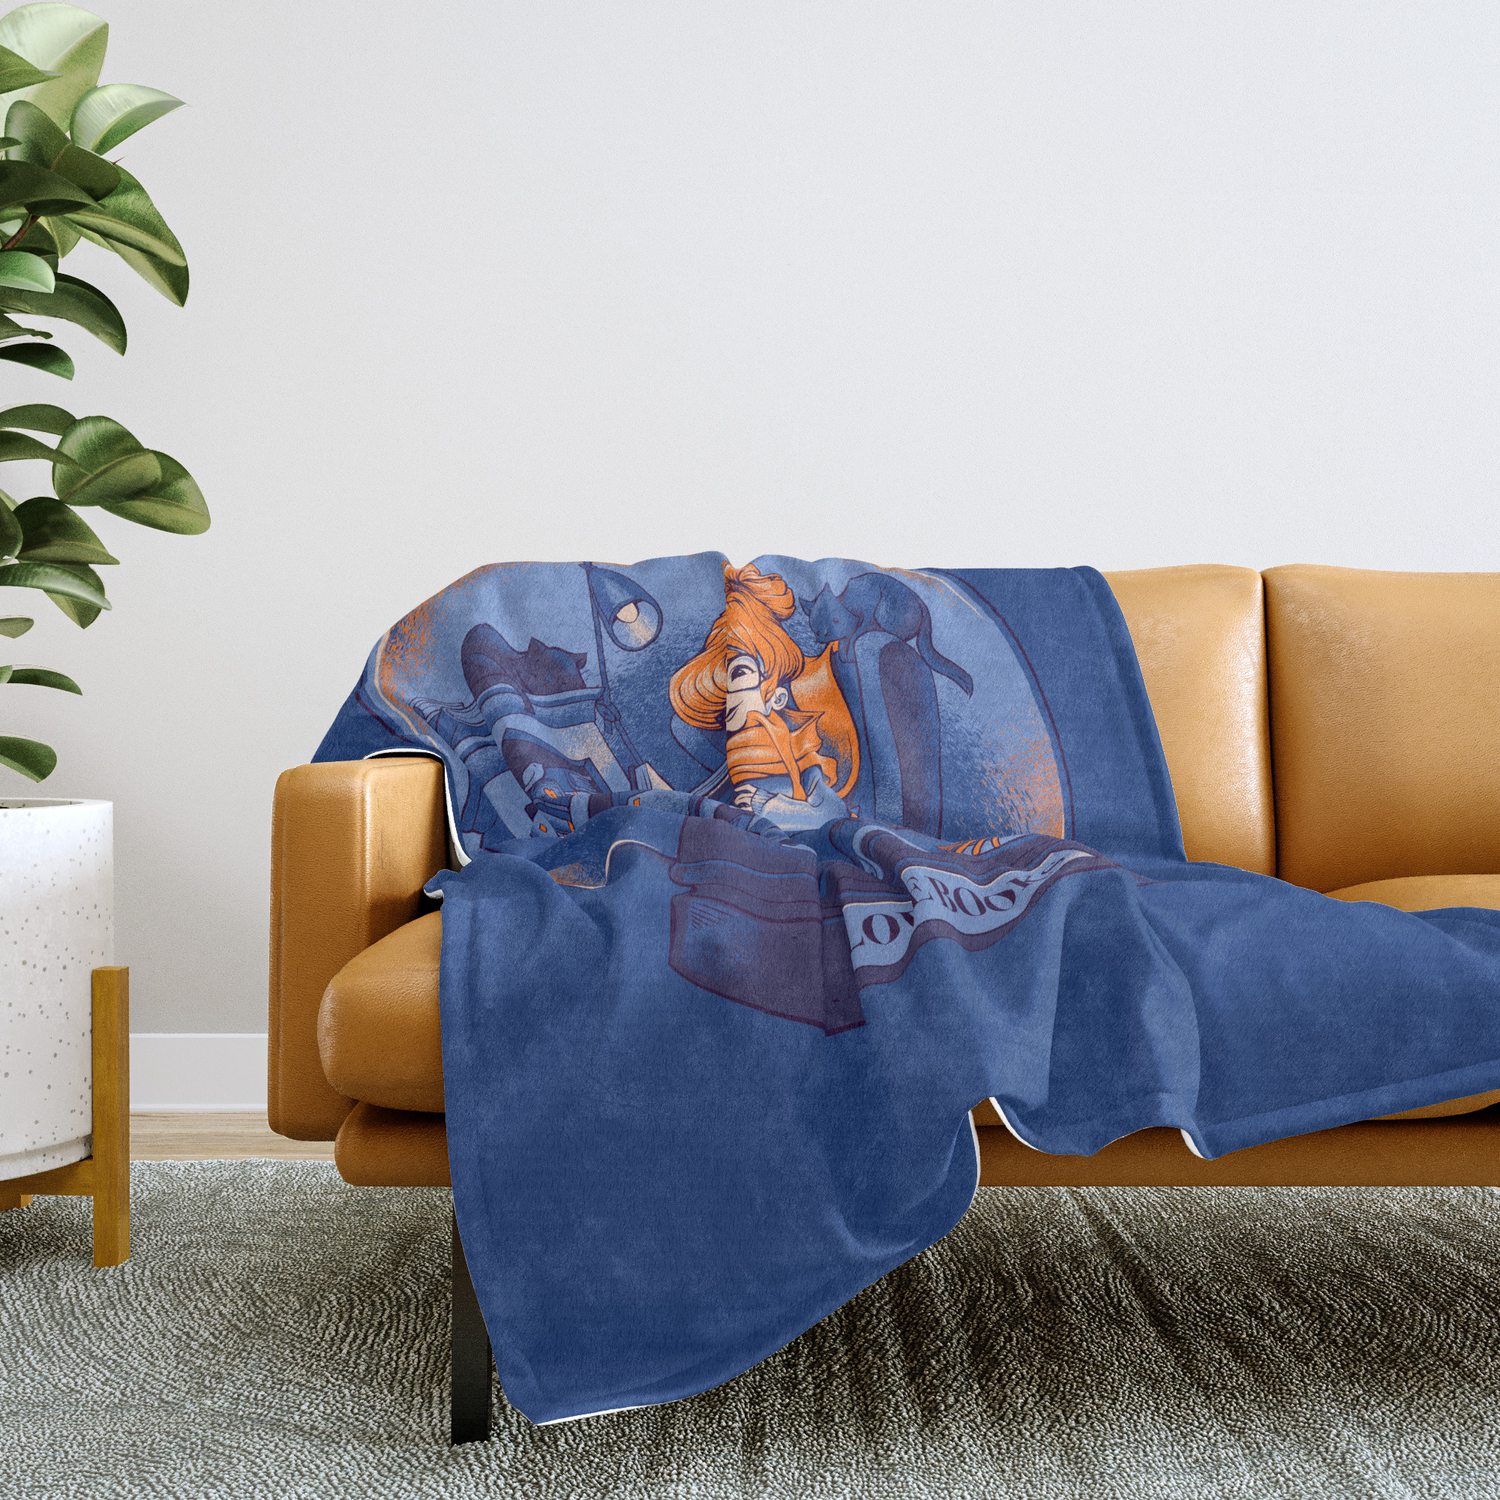 zbigtee Book and Cat Who Love Blanket Sofa Bed Throws/Throw Blanket for Adult and Fleece Blanket Throw Librarian 27.6 x 39.4 Brown, XS 